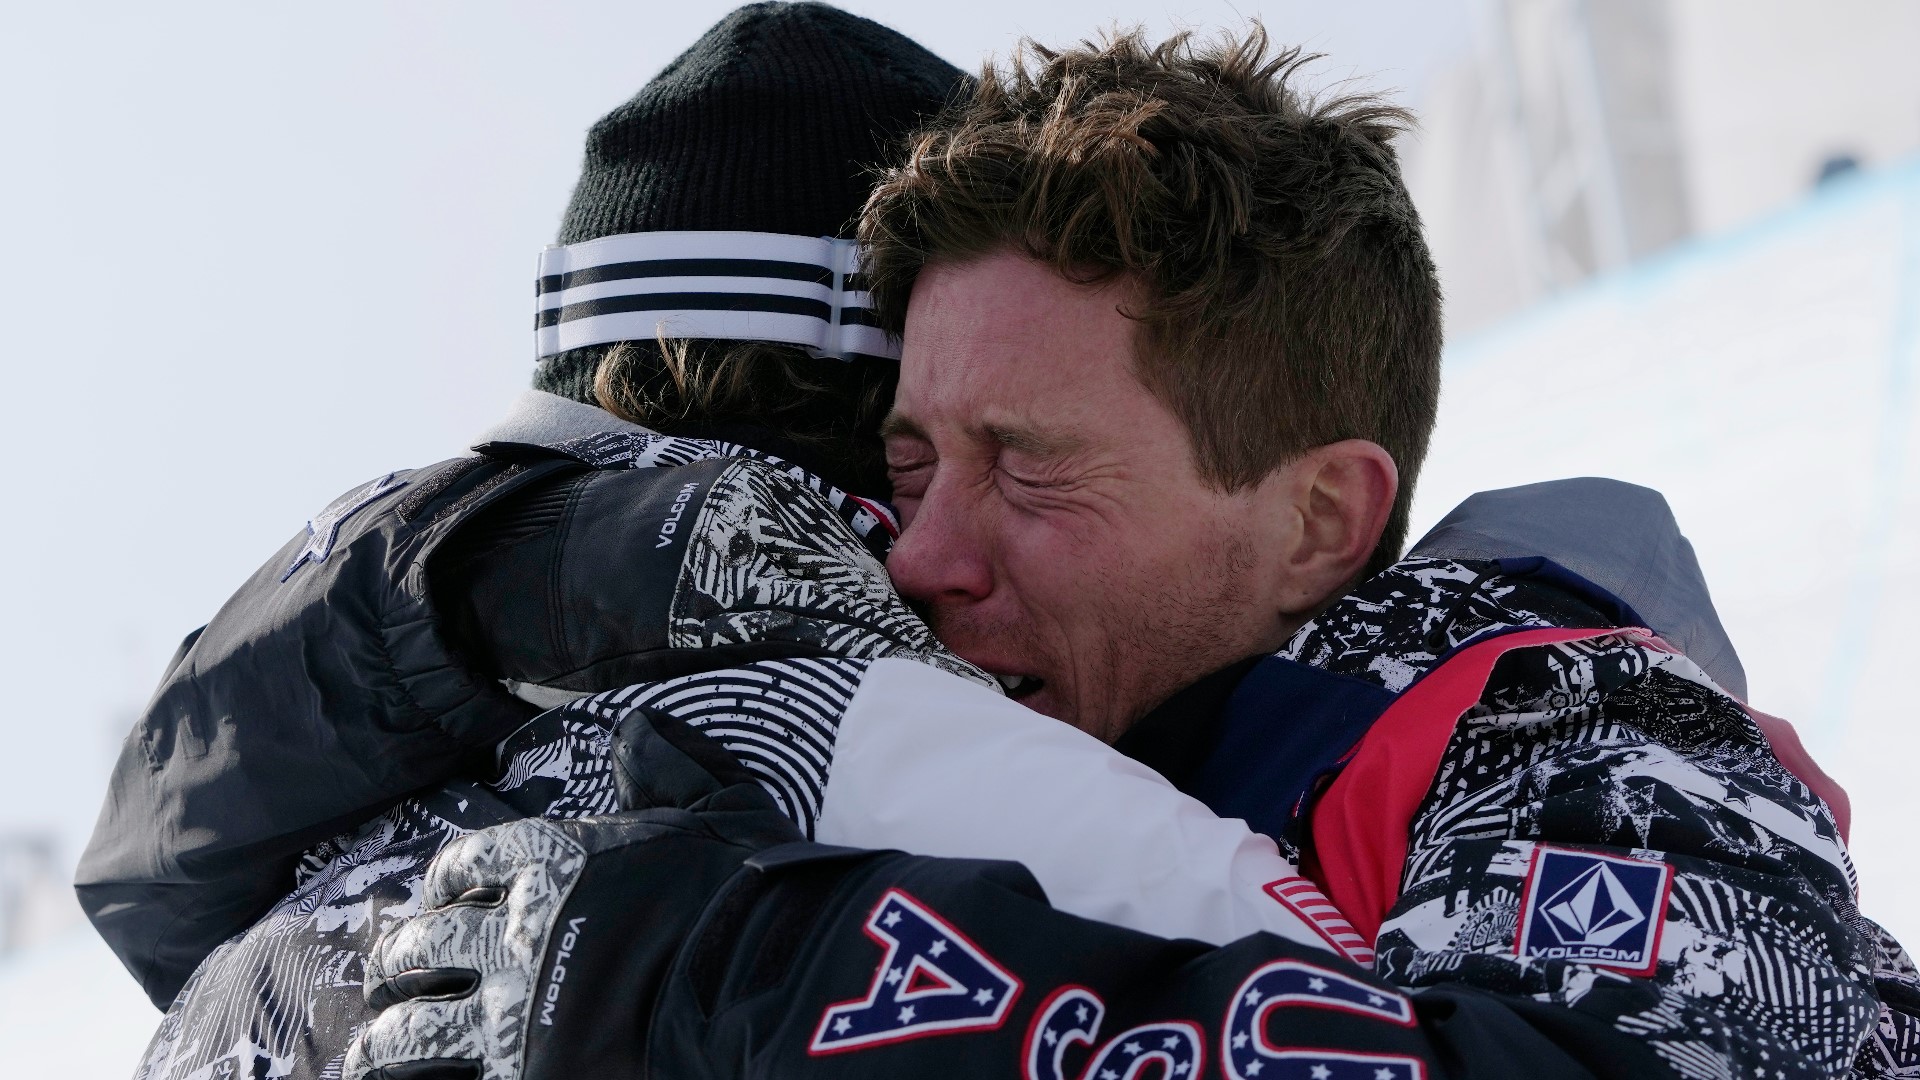 It's been the love of my life': Shaun White gives tearful farewell